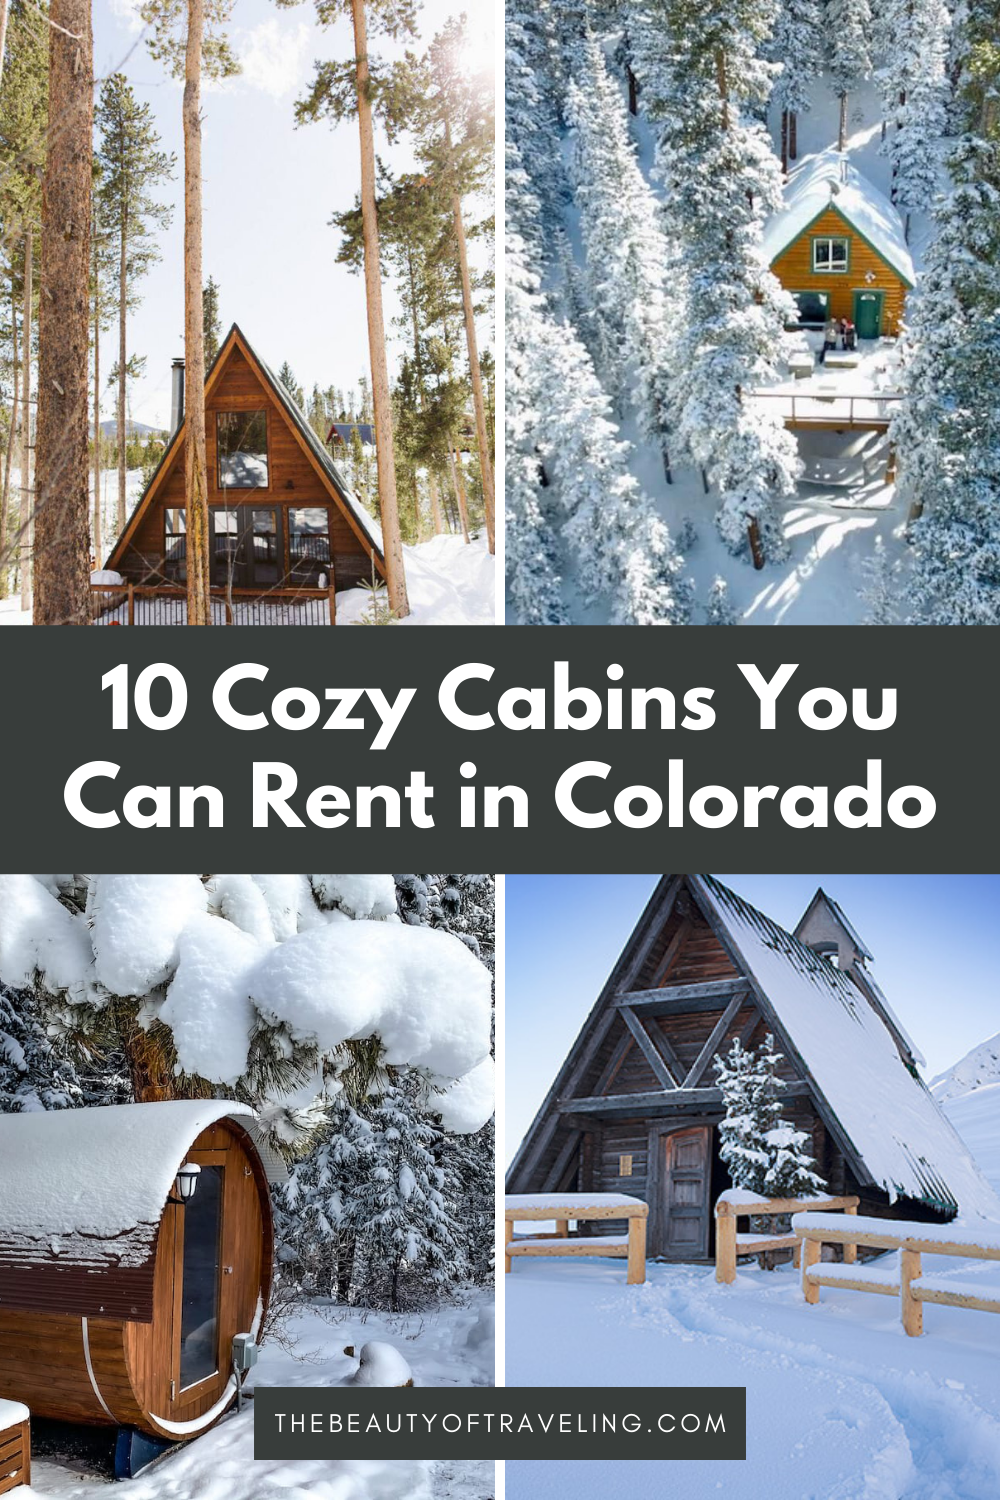 10 Of The Best Colorado Cabins You Can Rent on Airbnb